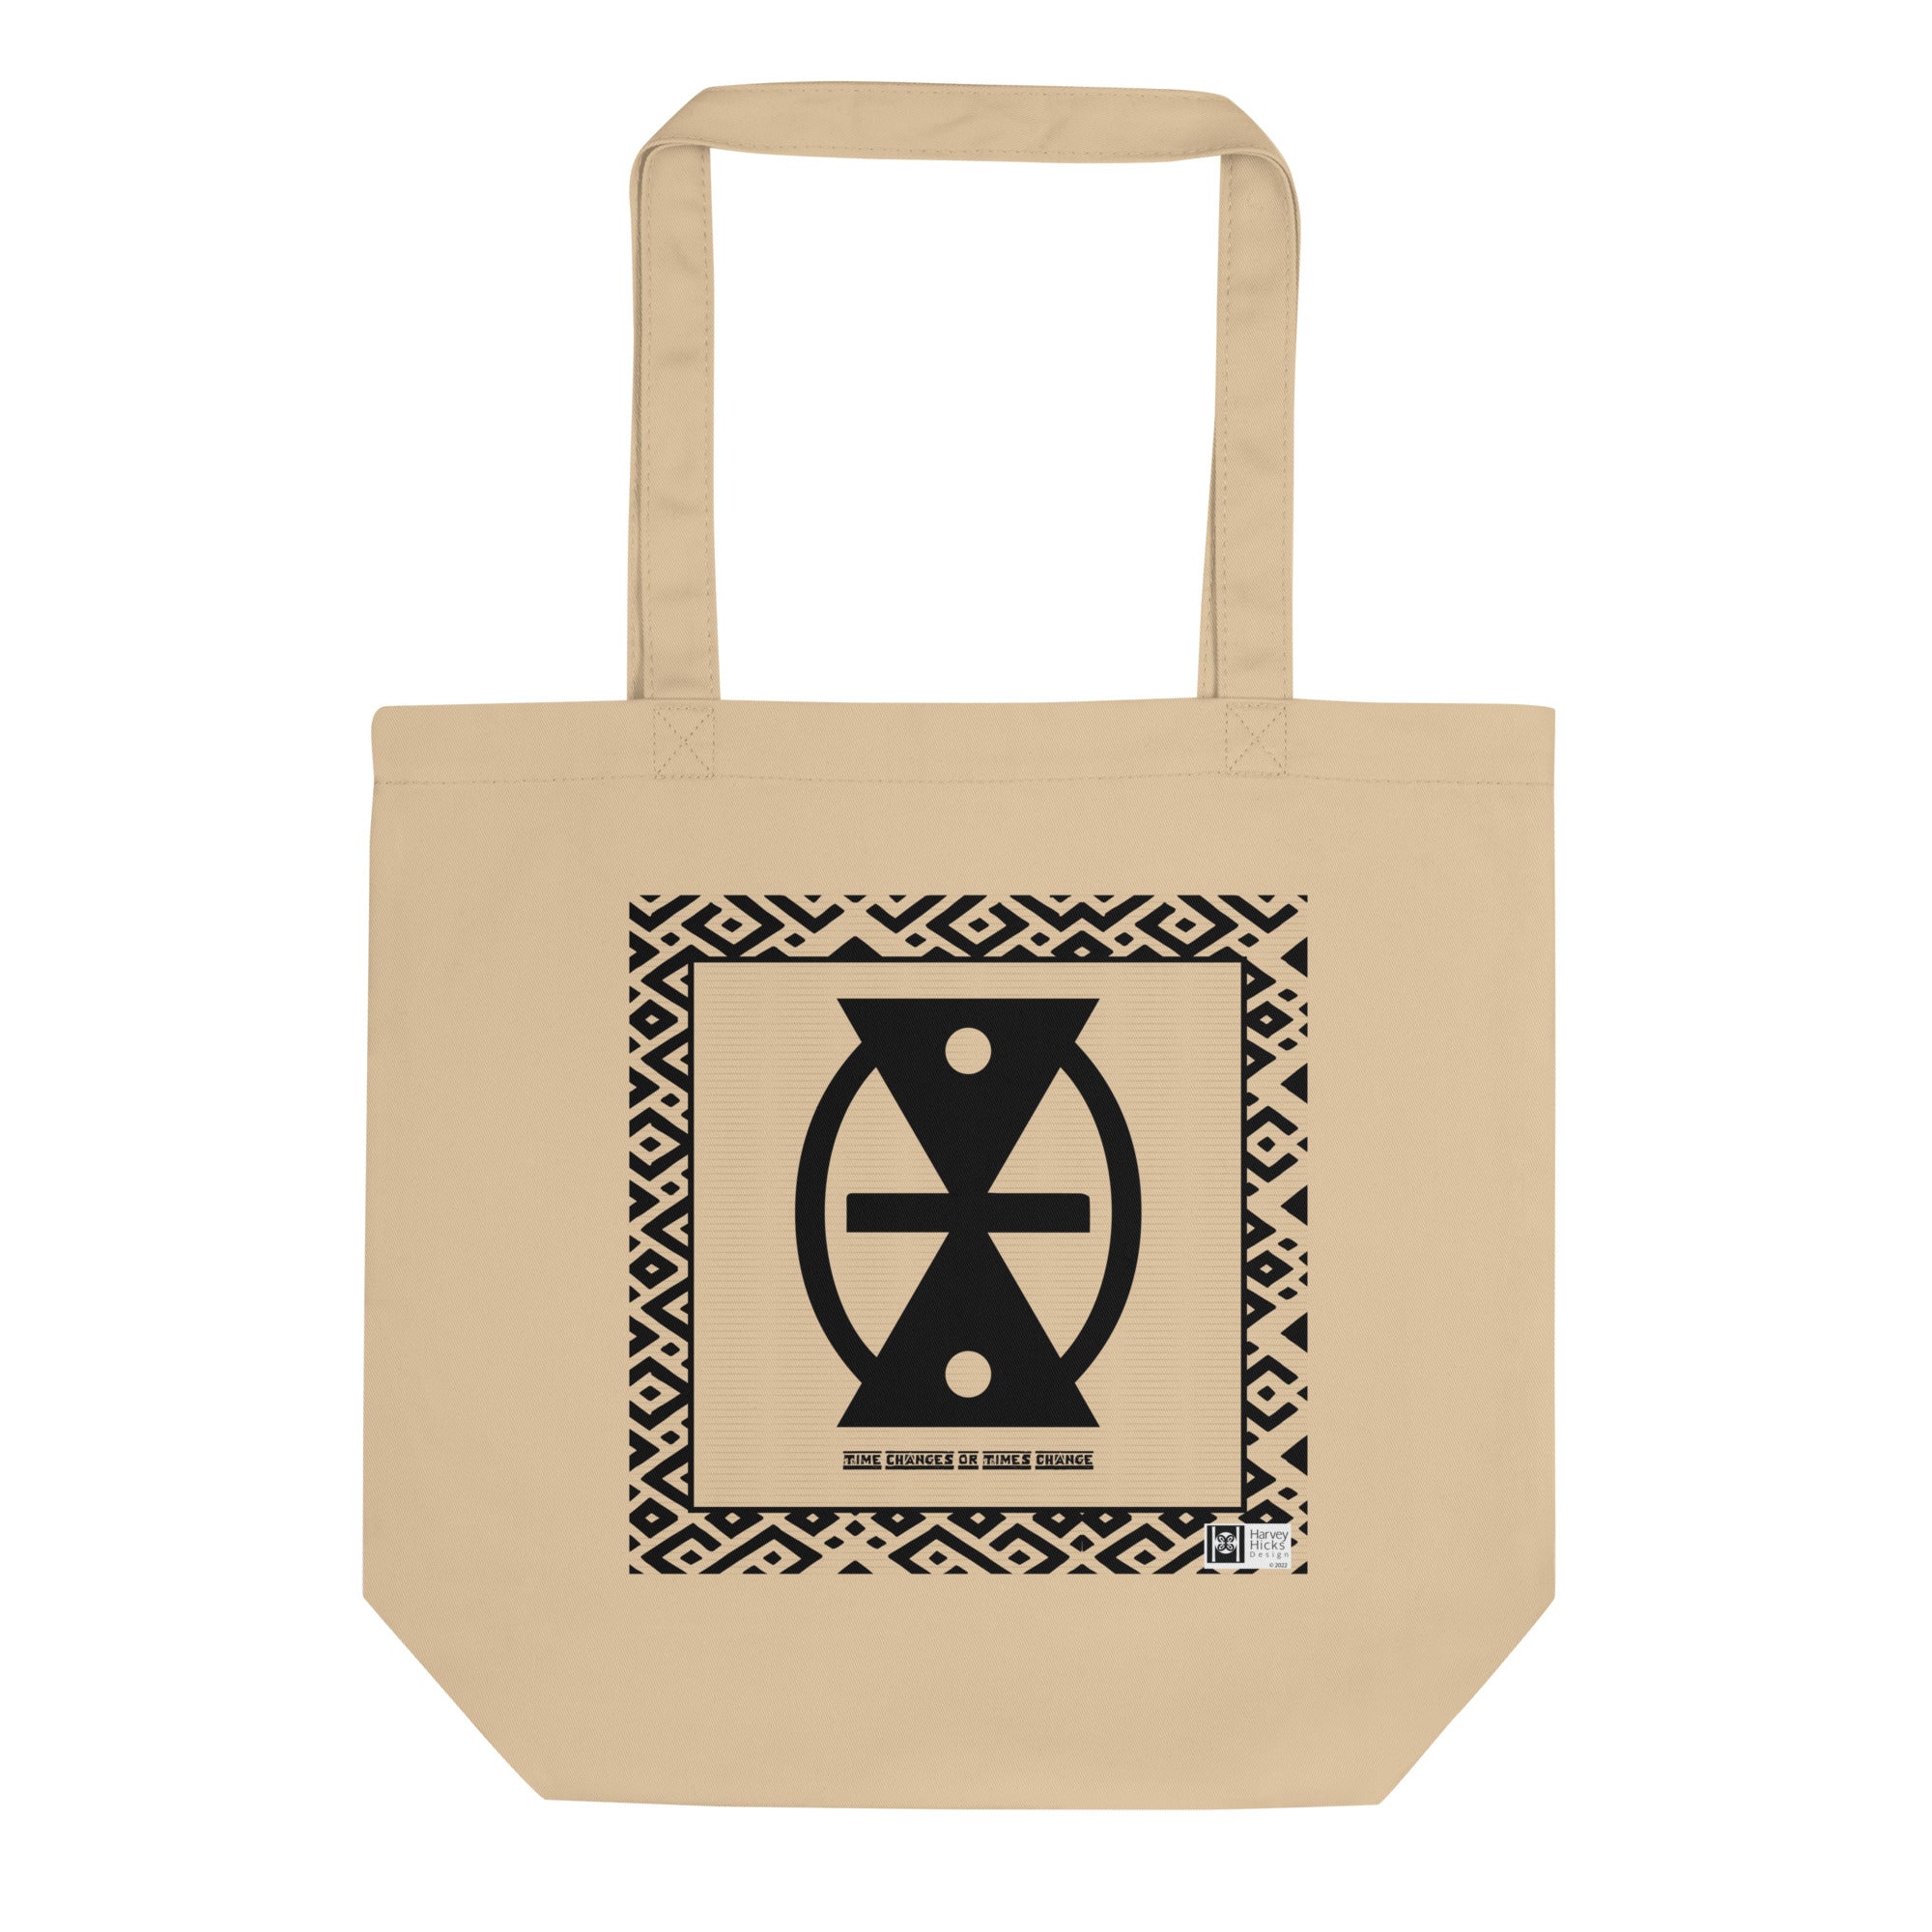 100% cotton Eco Tote Bag, featuring the Adinkra symbol for the fluidity of time